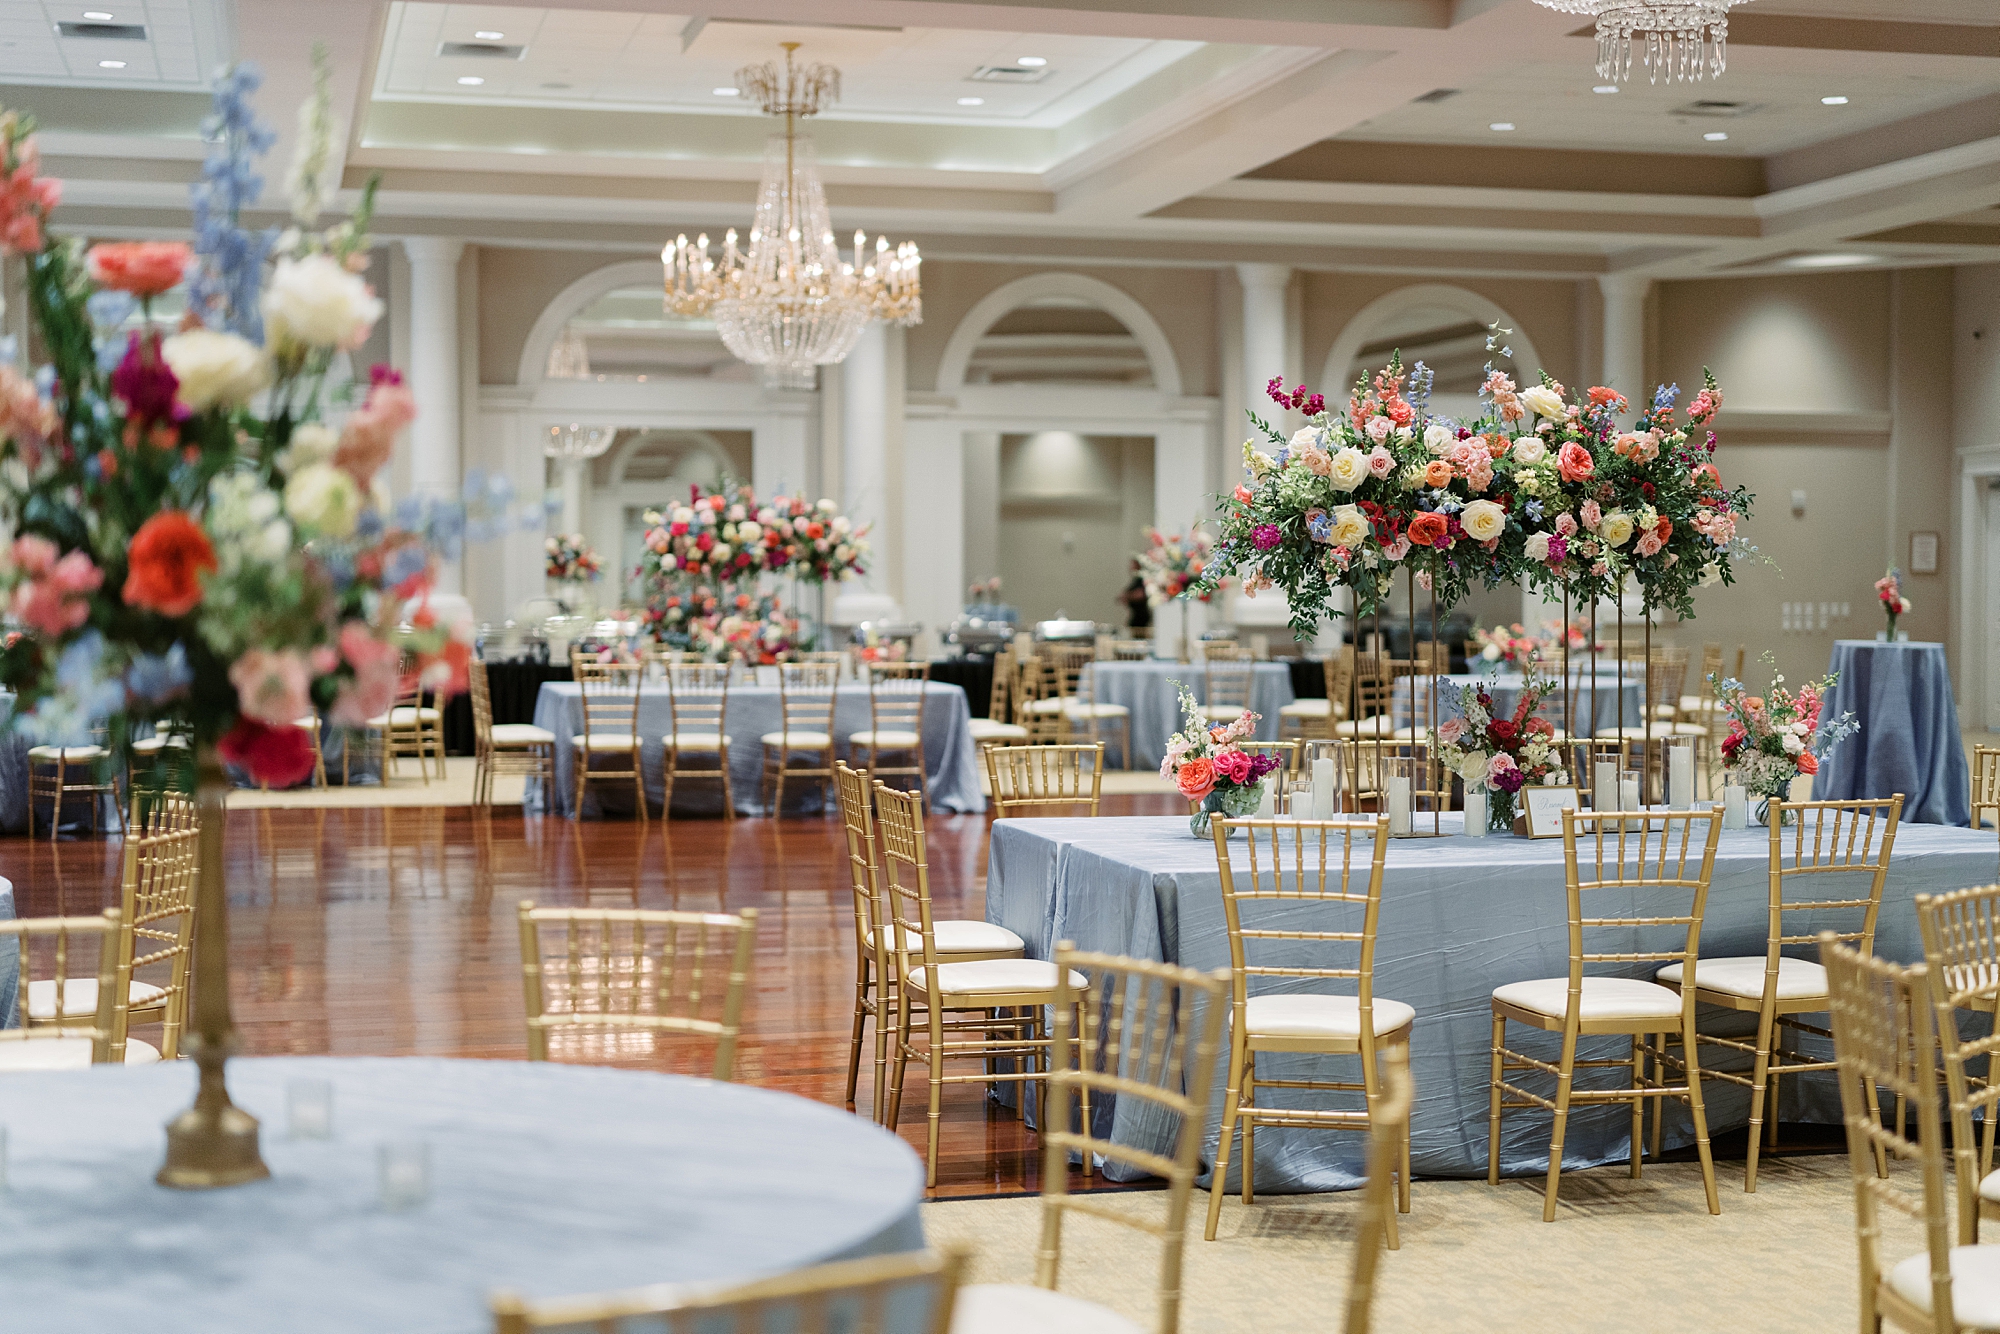 wedding reception at Le Pavilion Hotel with pink, white and blue floral displays 